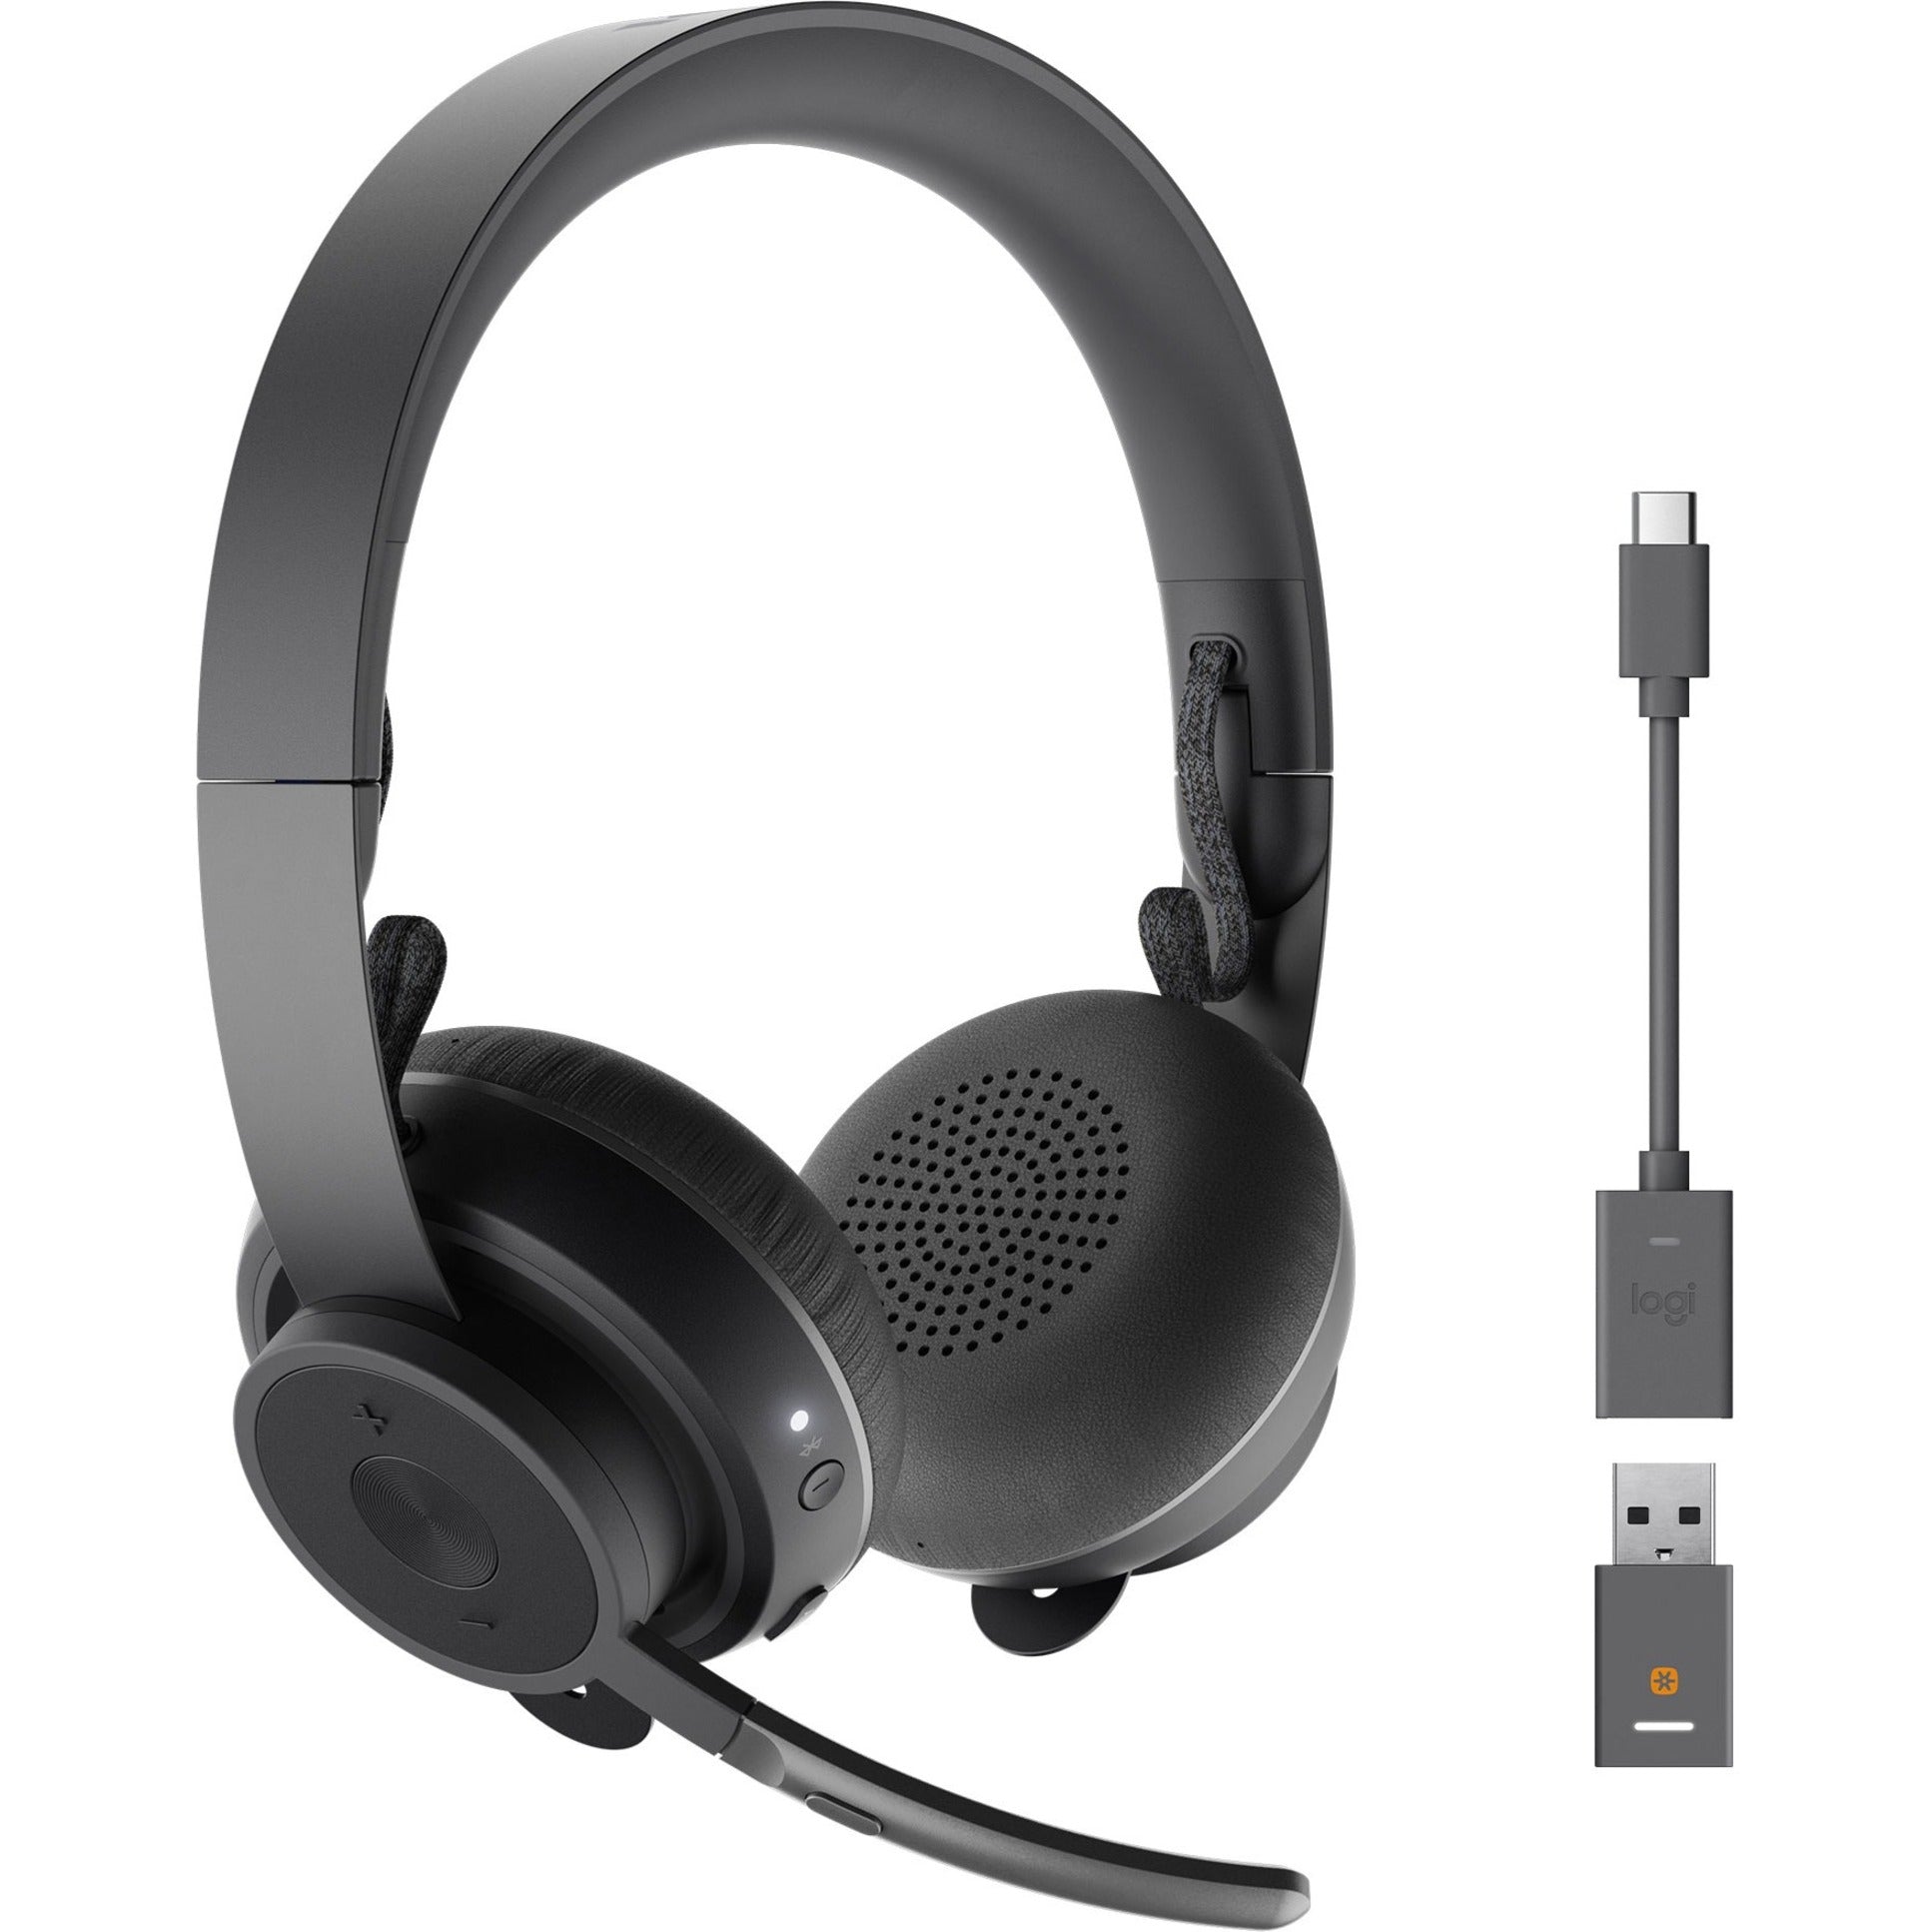 Logitech 981-001100 Zone 900 Headset Wireless Bluetooth Over-Ear Headset with Noise Canceling Graphite